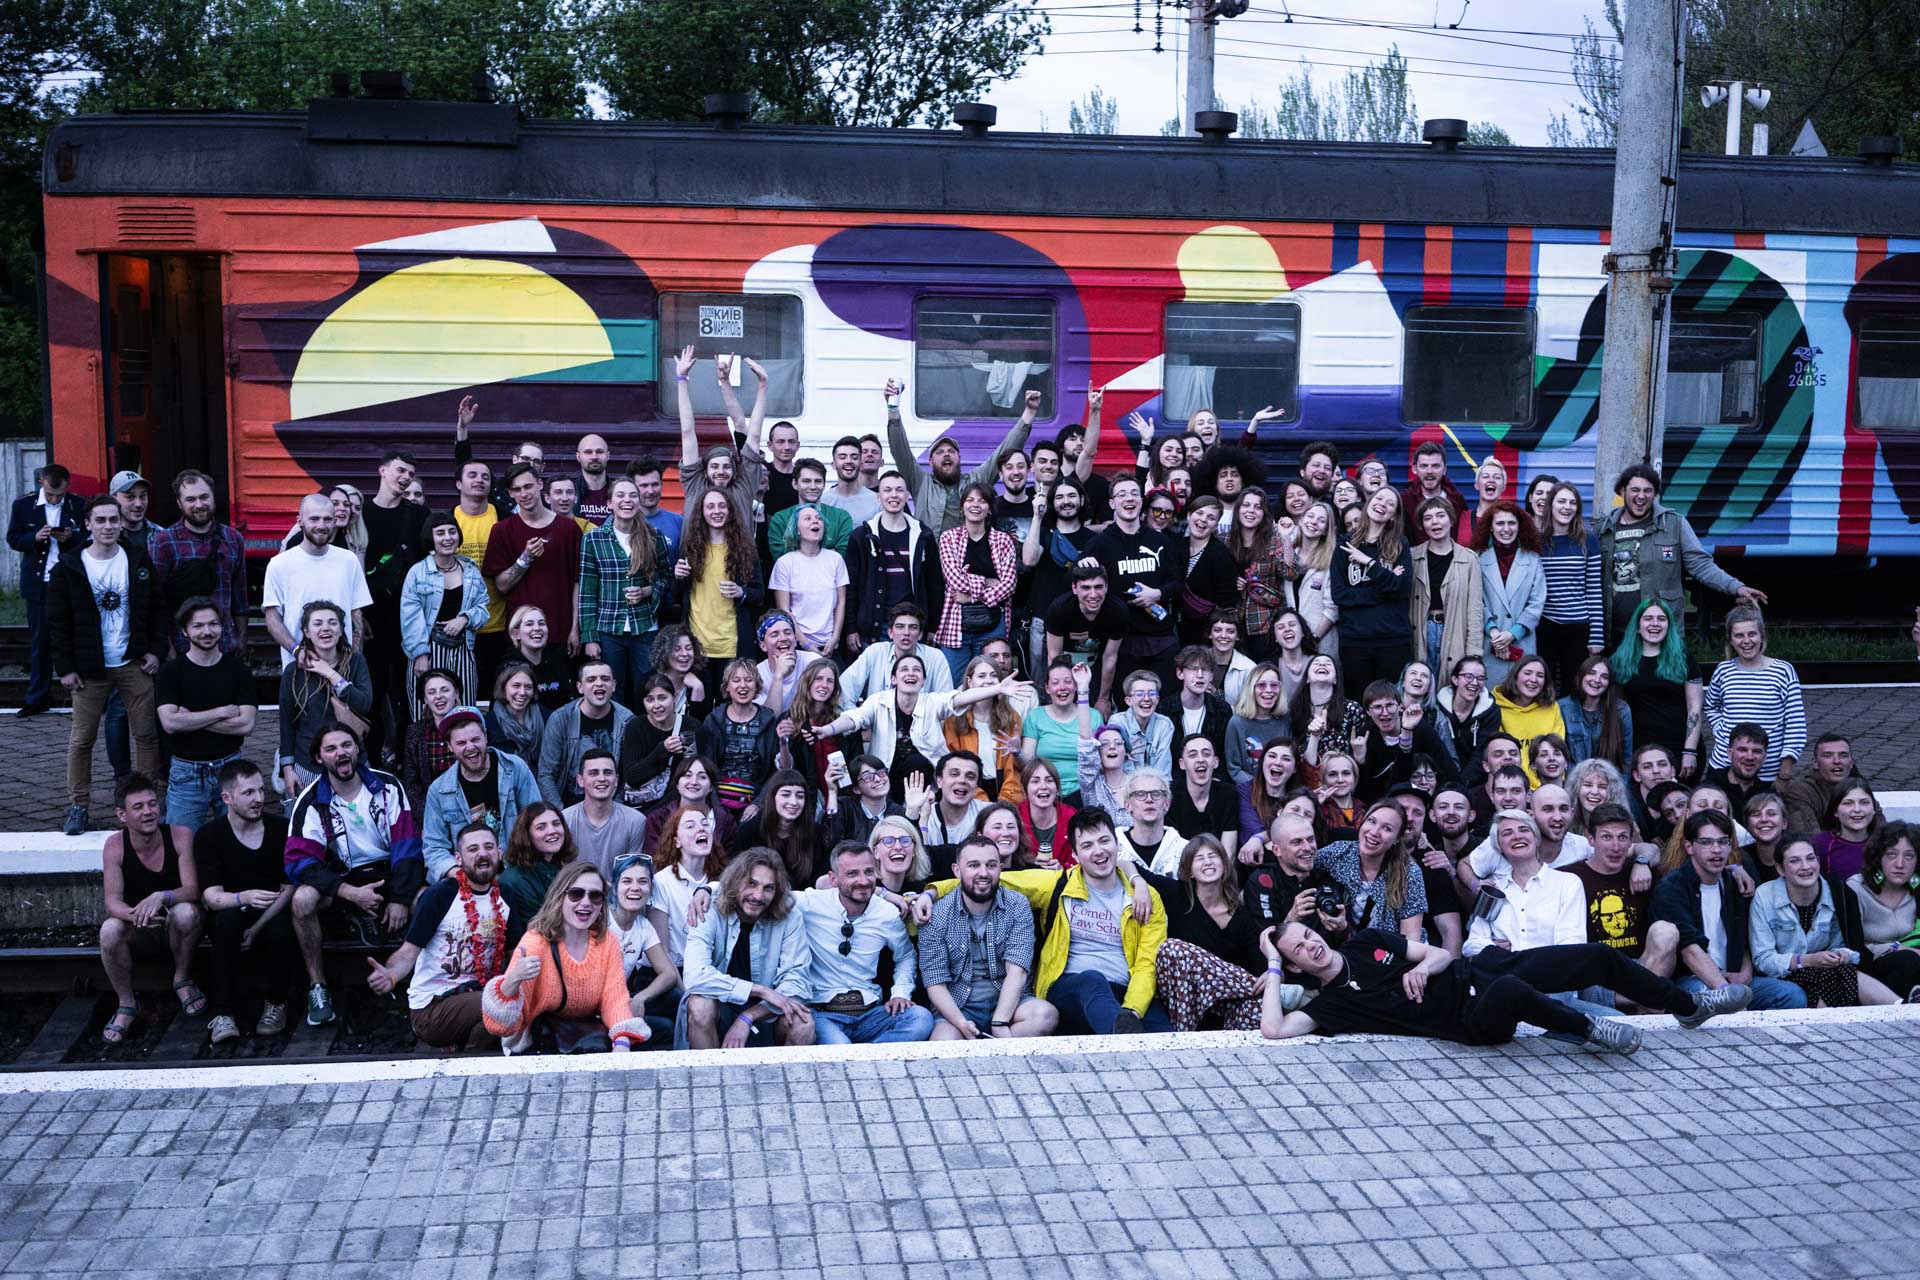 GogolTrain: Europe’s first art train amps up Ukraine’s cultural mobility ~~